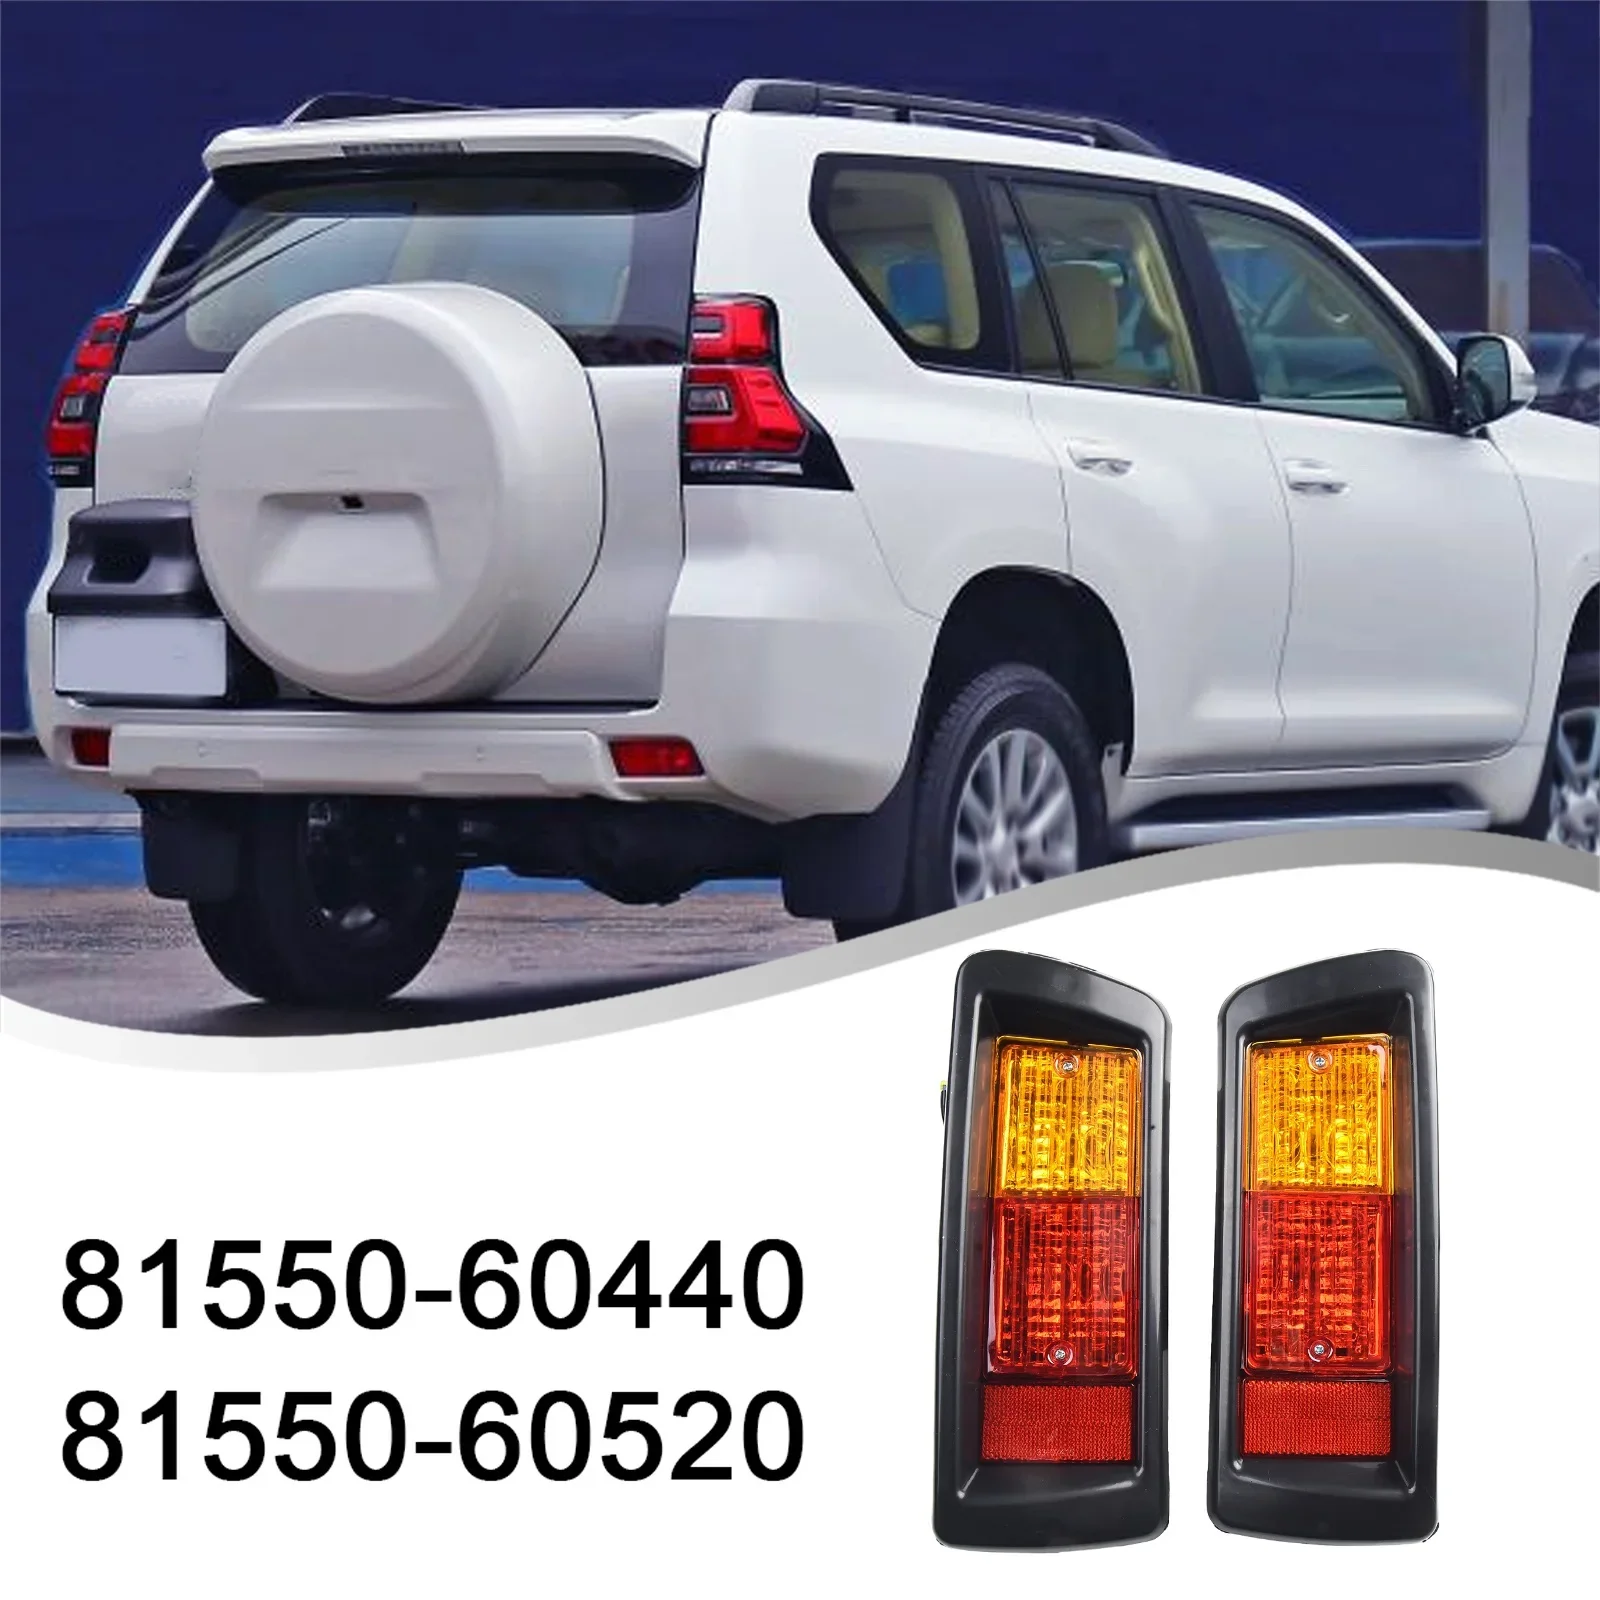 

2pcs Rear Bumper Lamp Tail Light For Toyota For Land For Cruiser For Prado 1995-2002 81550-60520 Replace Auto Accessories